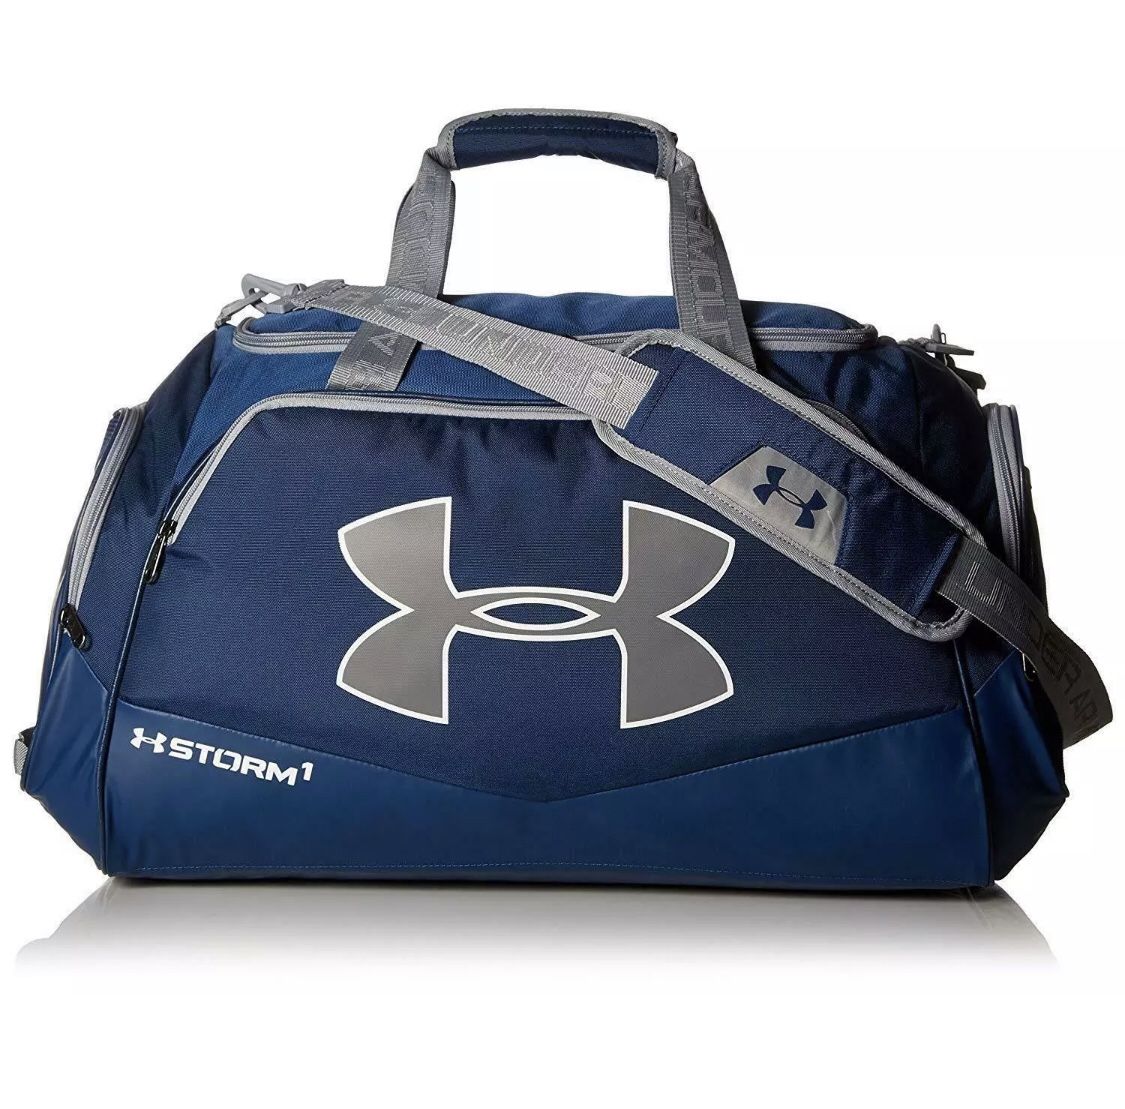 Under armour duffel bag new with tags